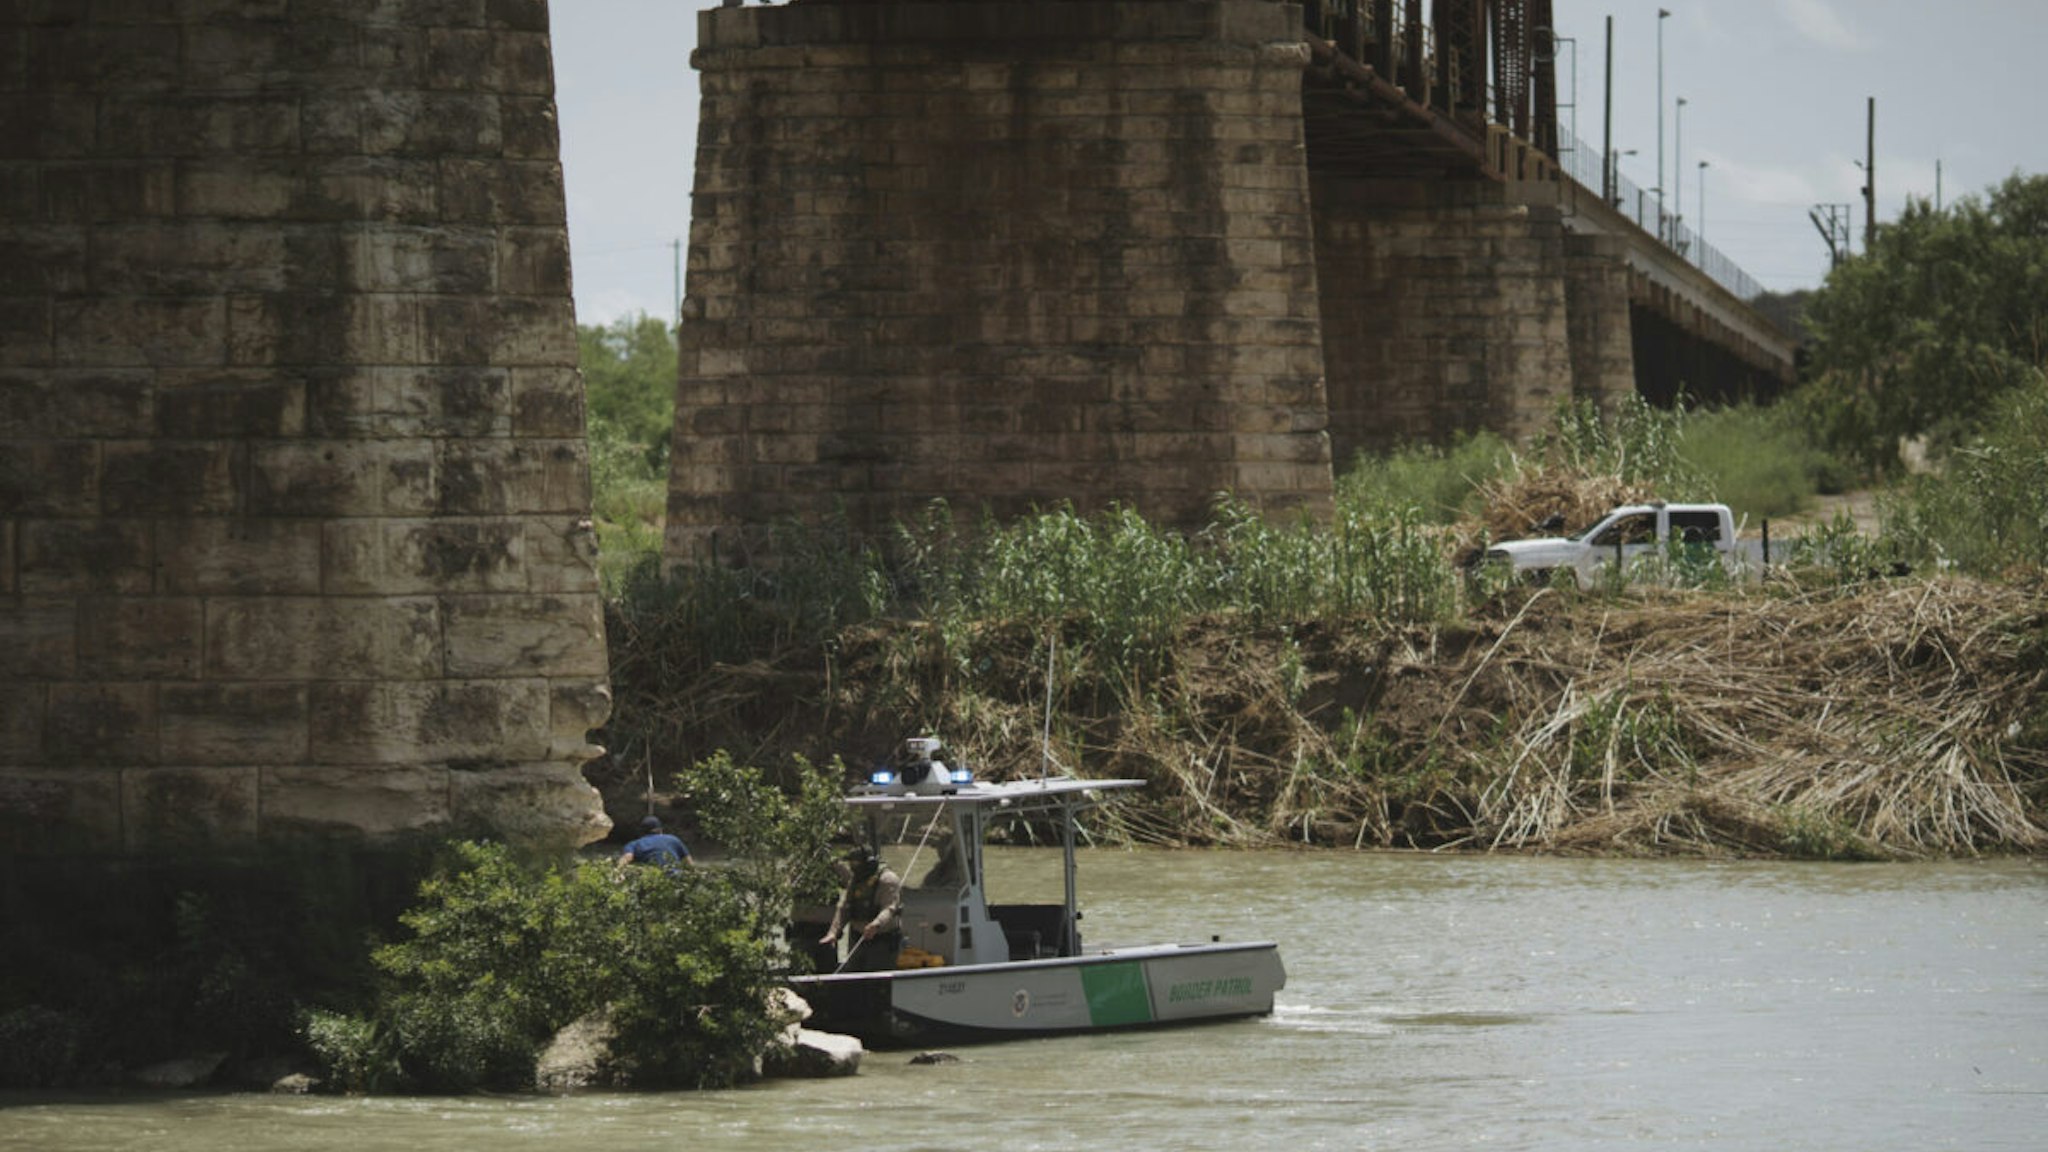 US Border Patrol agents perform a rescue along the Rio Grande River in Eagle Pass, Texas, US, on Tuesday, May 24, 2022